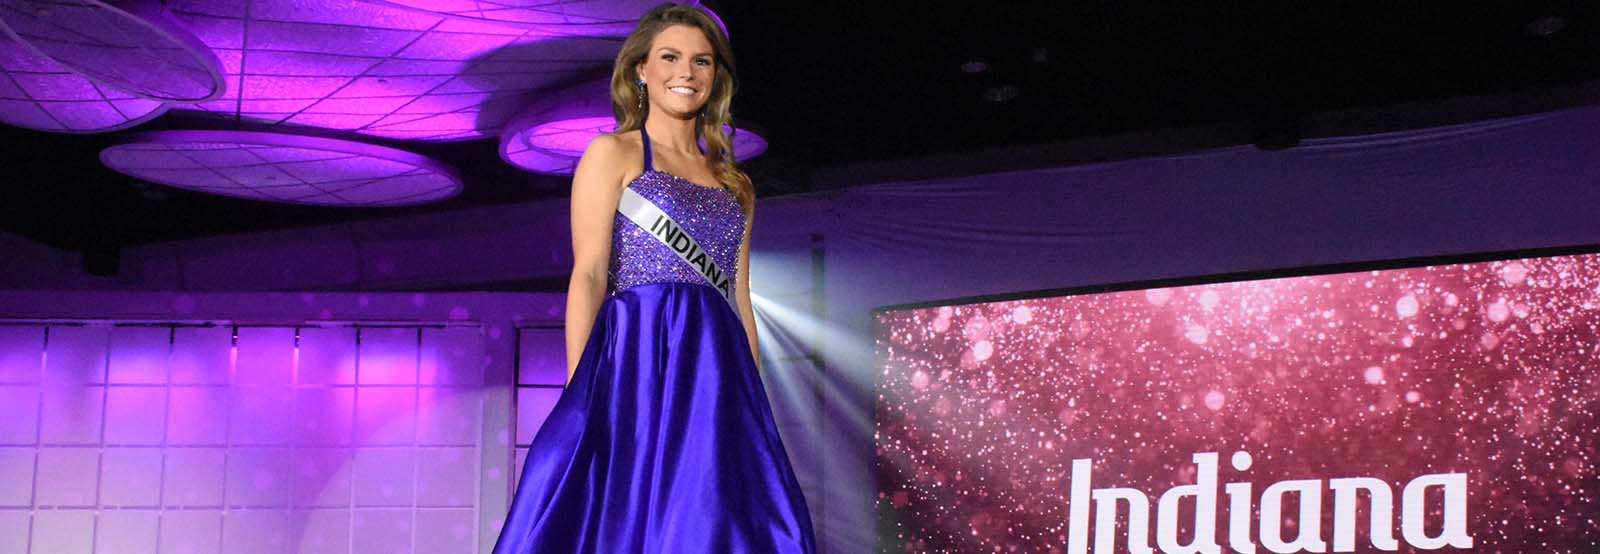 Trine student excels, grows through National American Miss